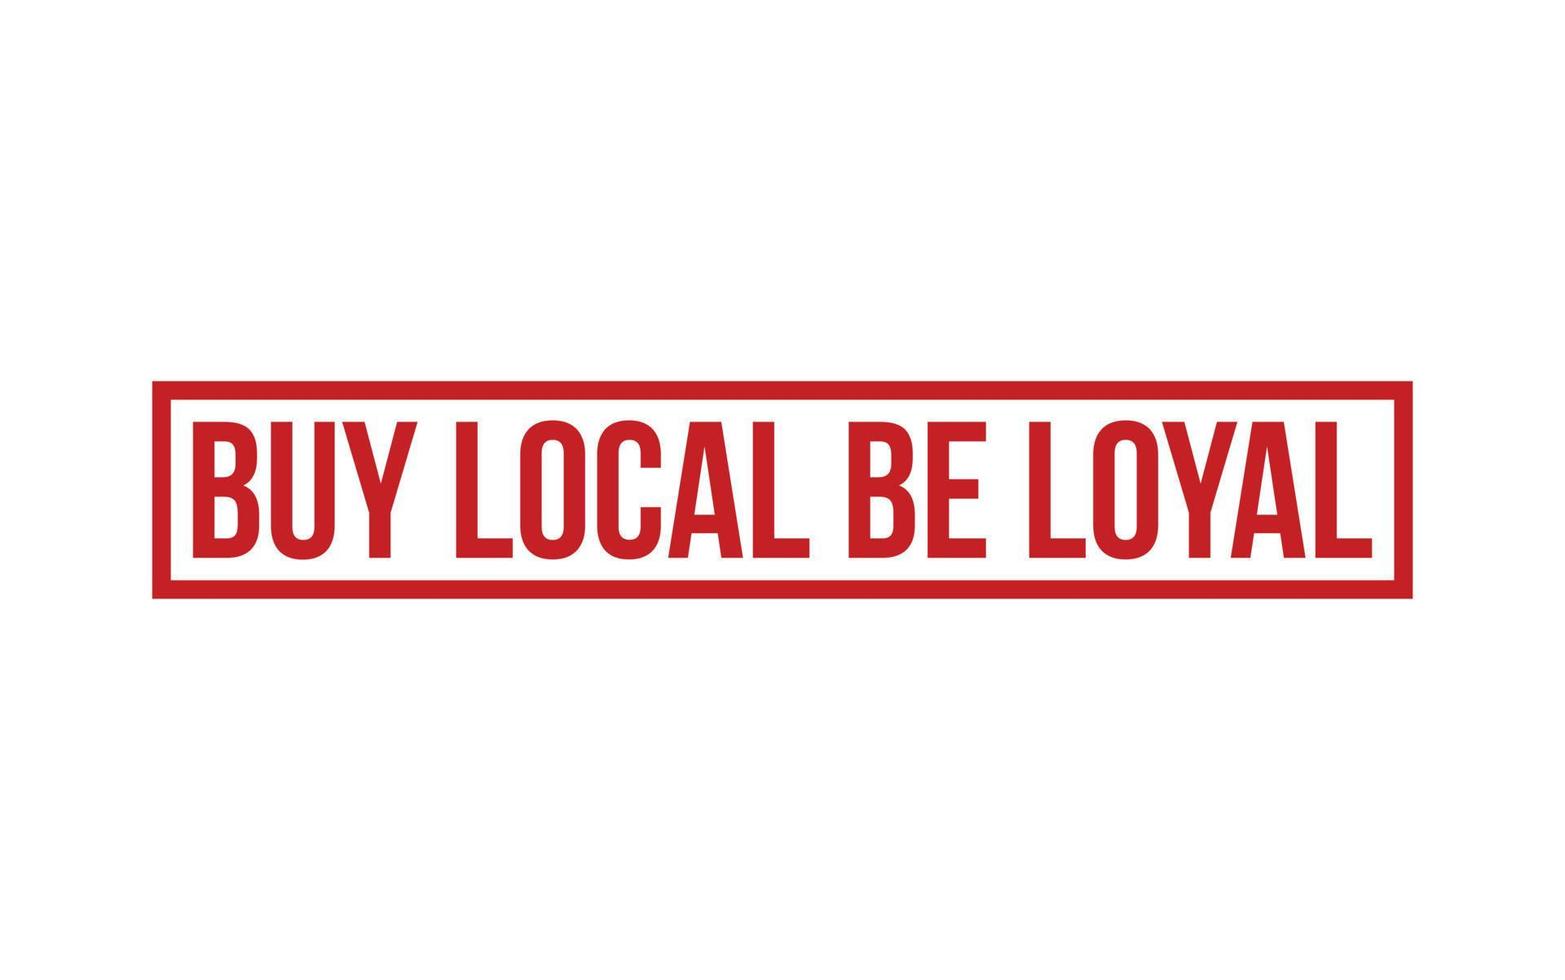 Buy Local Be Loyal Rubber Stamp Seal Vector